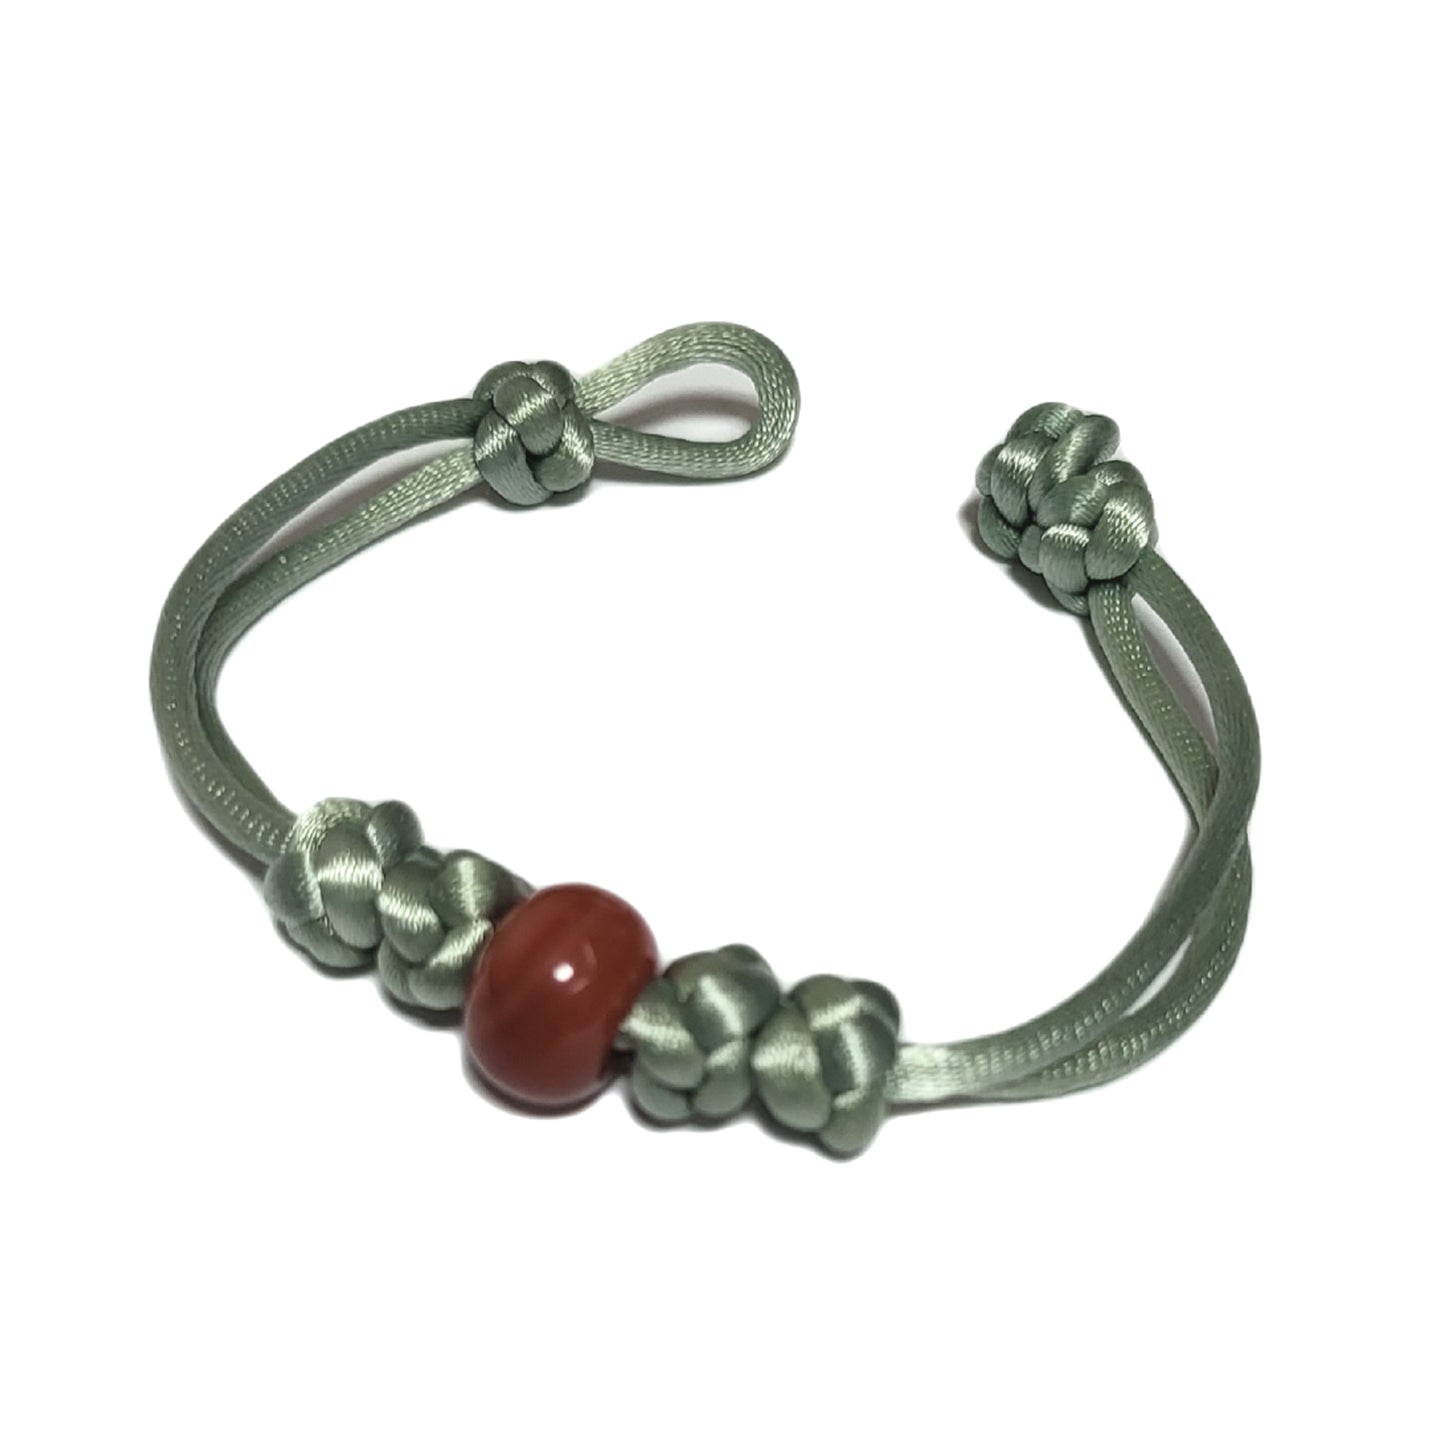 bracelet, Korea traditional knot, satin bracelet with real stone for accessory (not plastic) , mint color